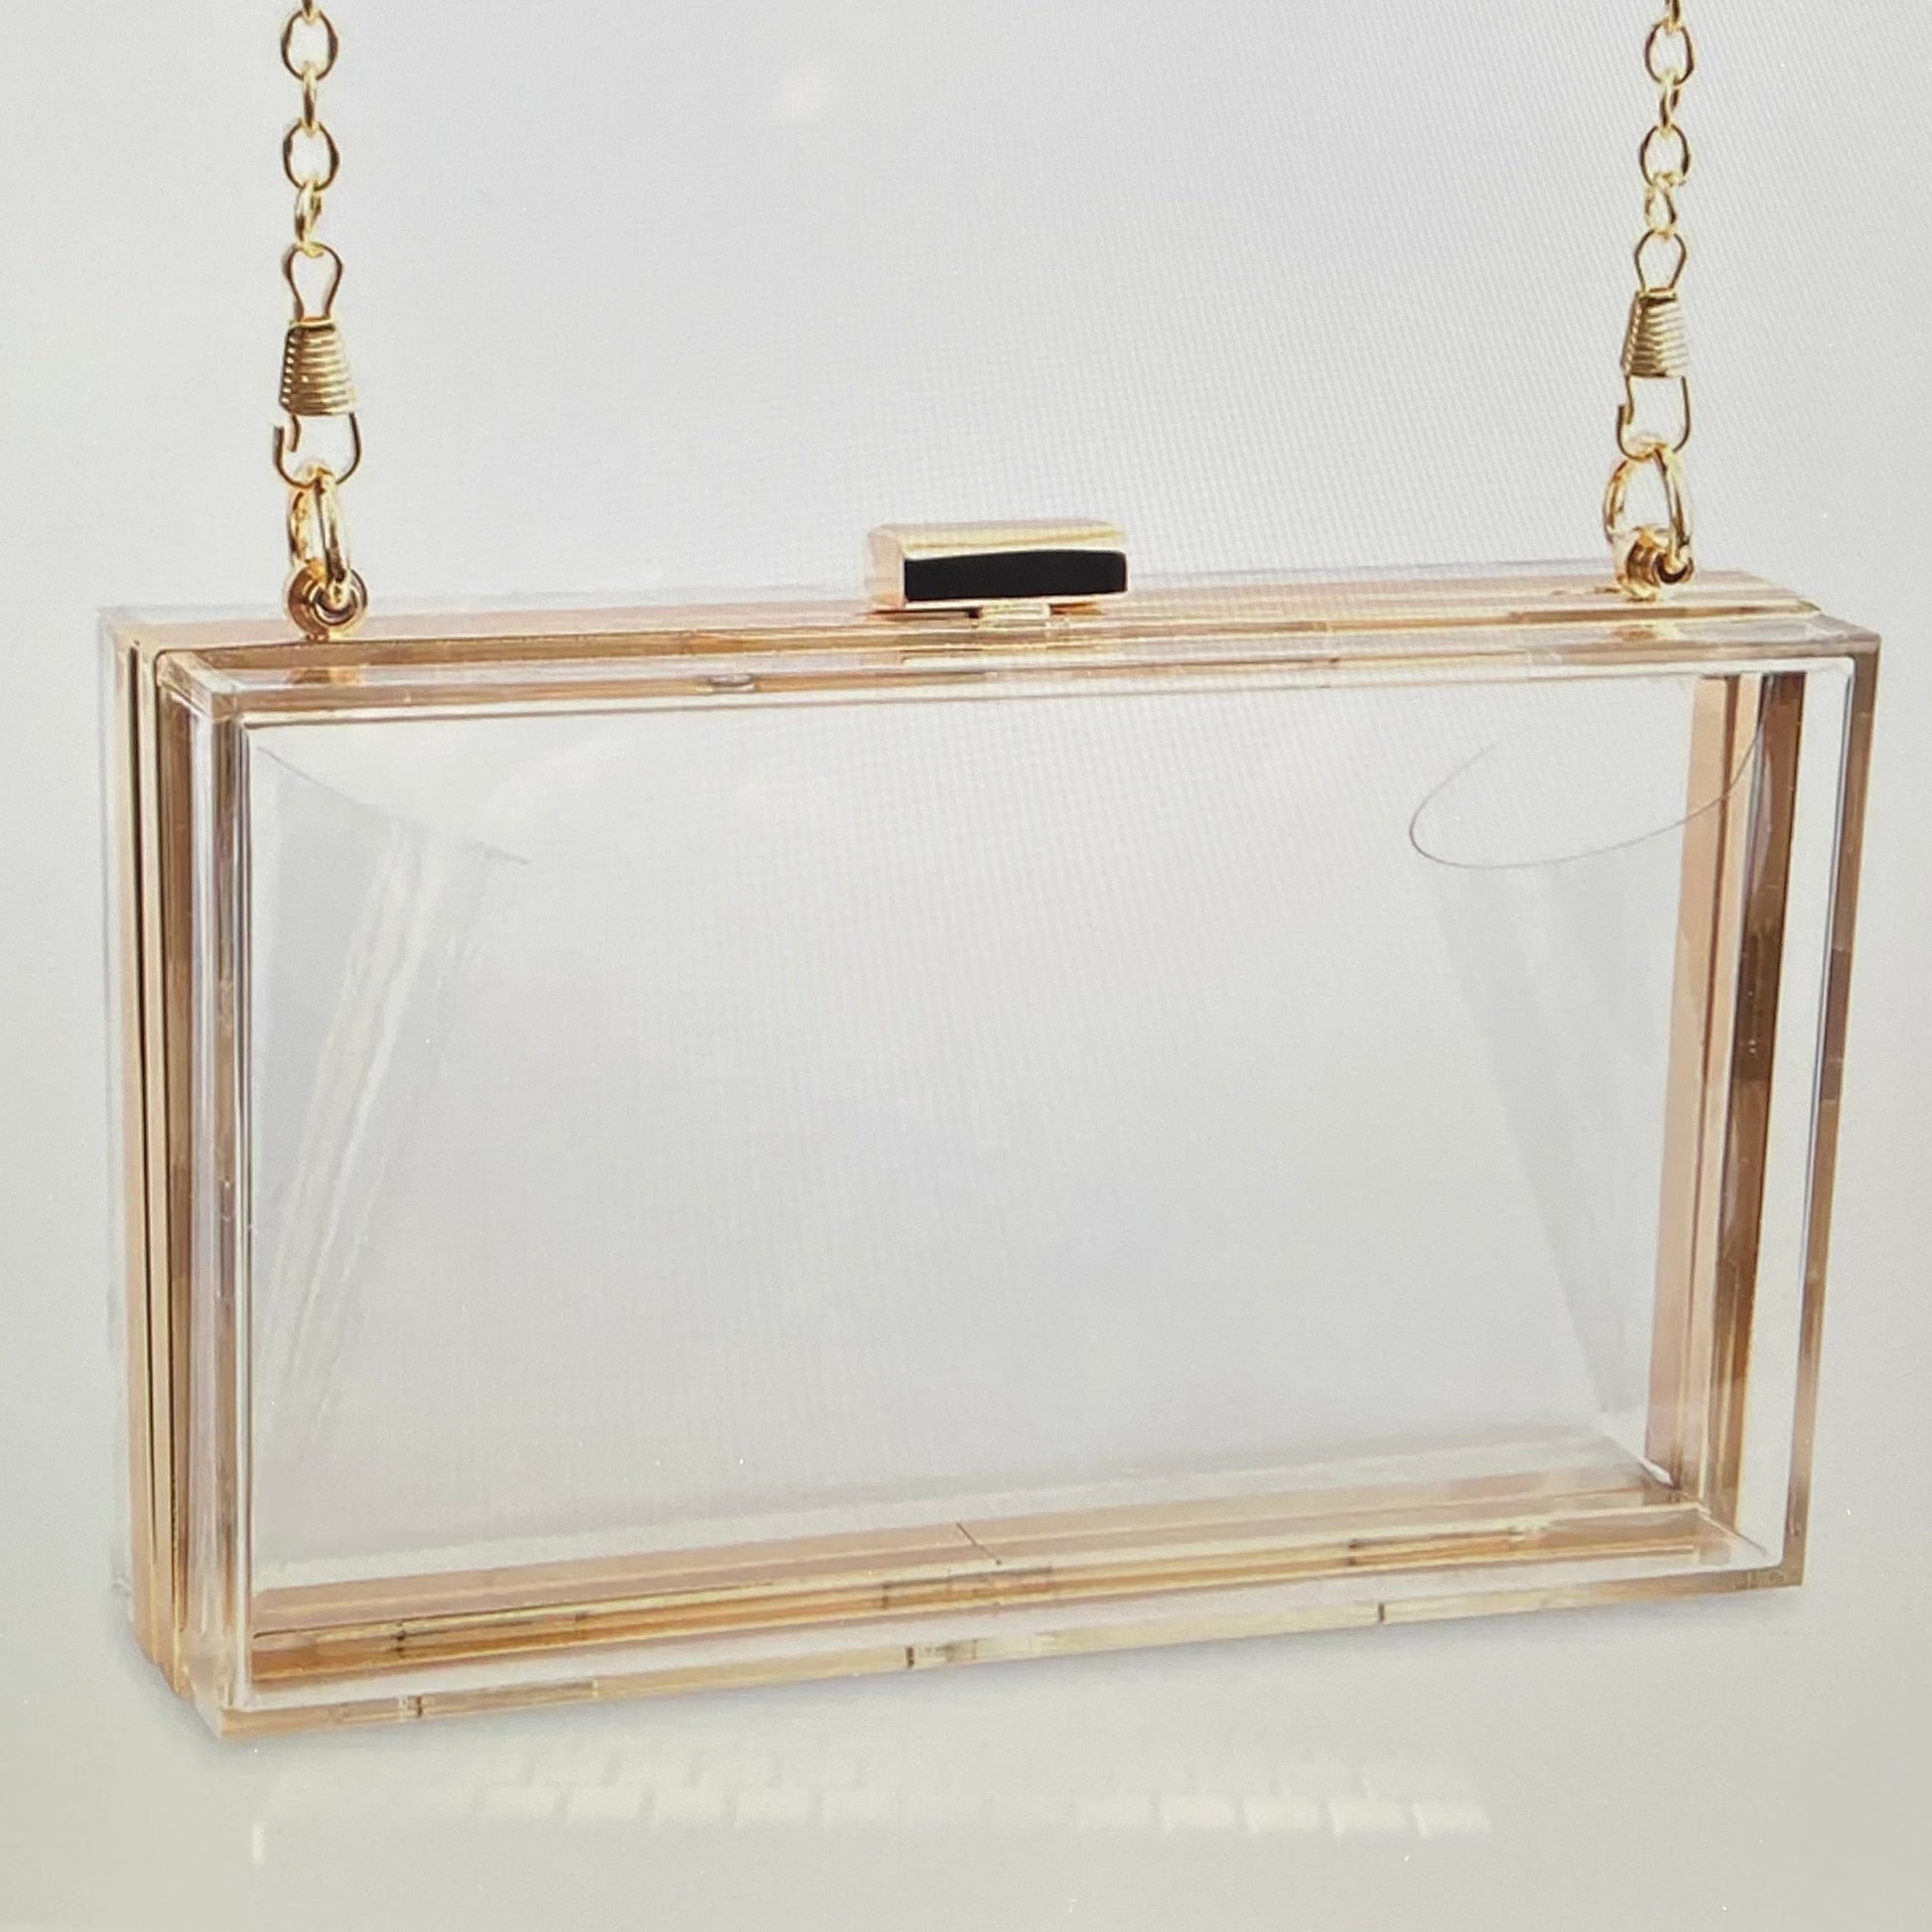 Clear Acrylic Purse with White and Gold Star Strap – Gameday Graduate